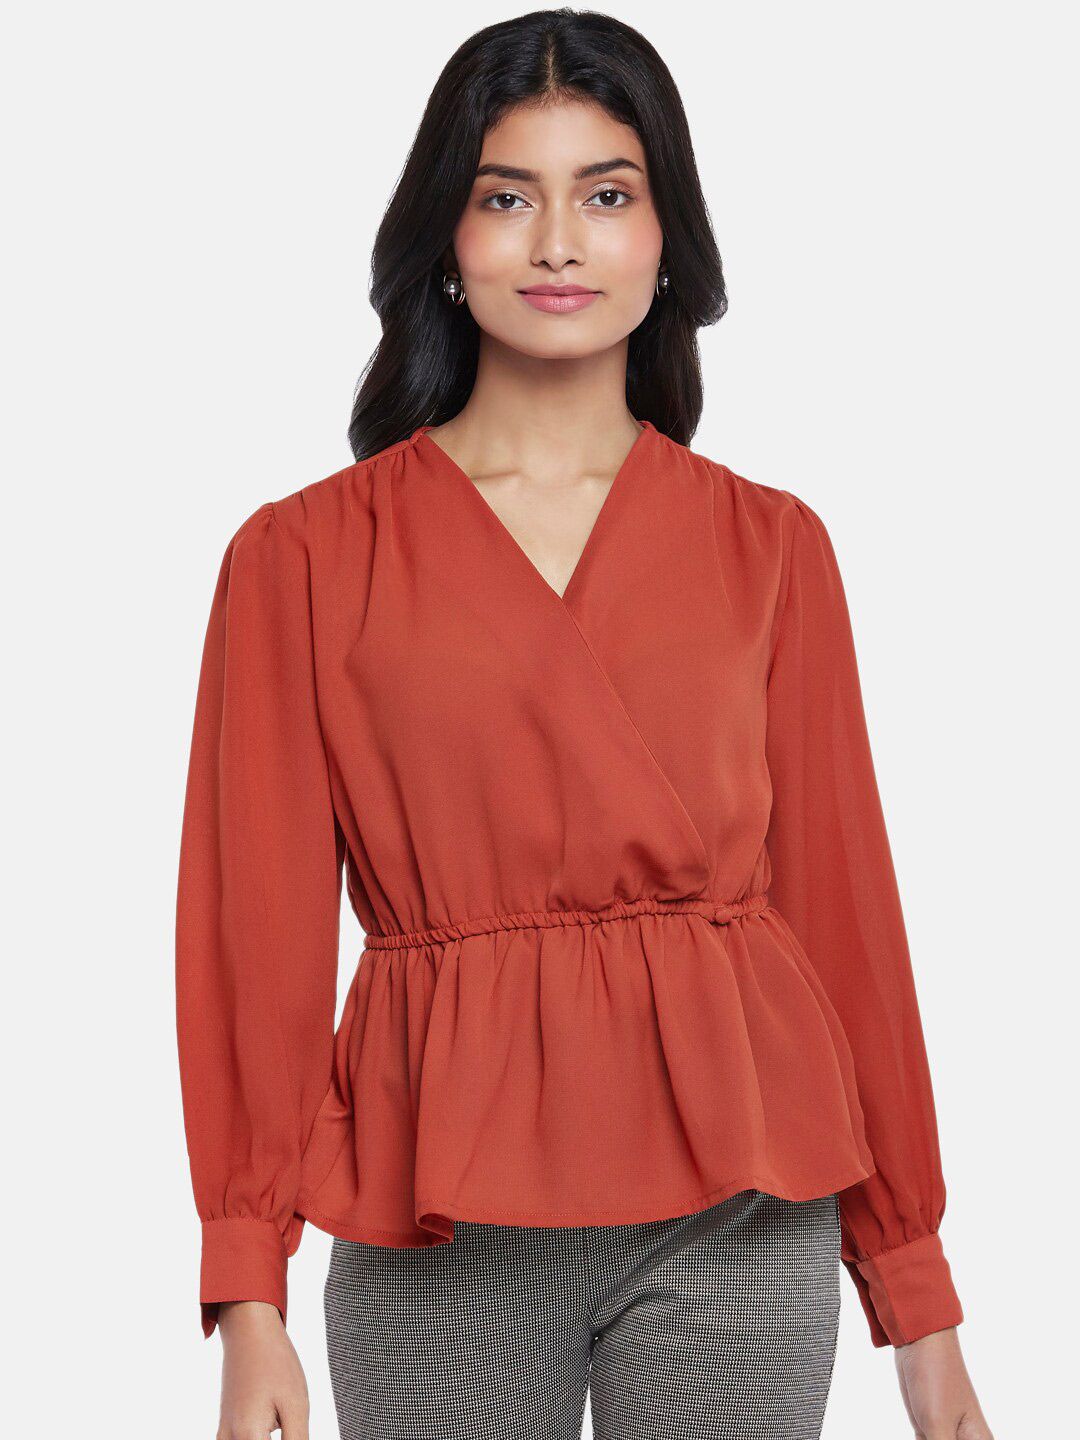 Annabelle by Pantaloons Rust Cinched Waist Top Price in India